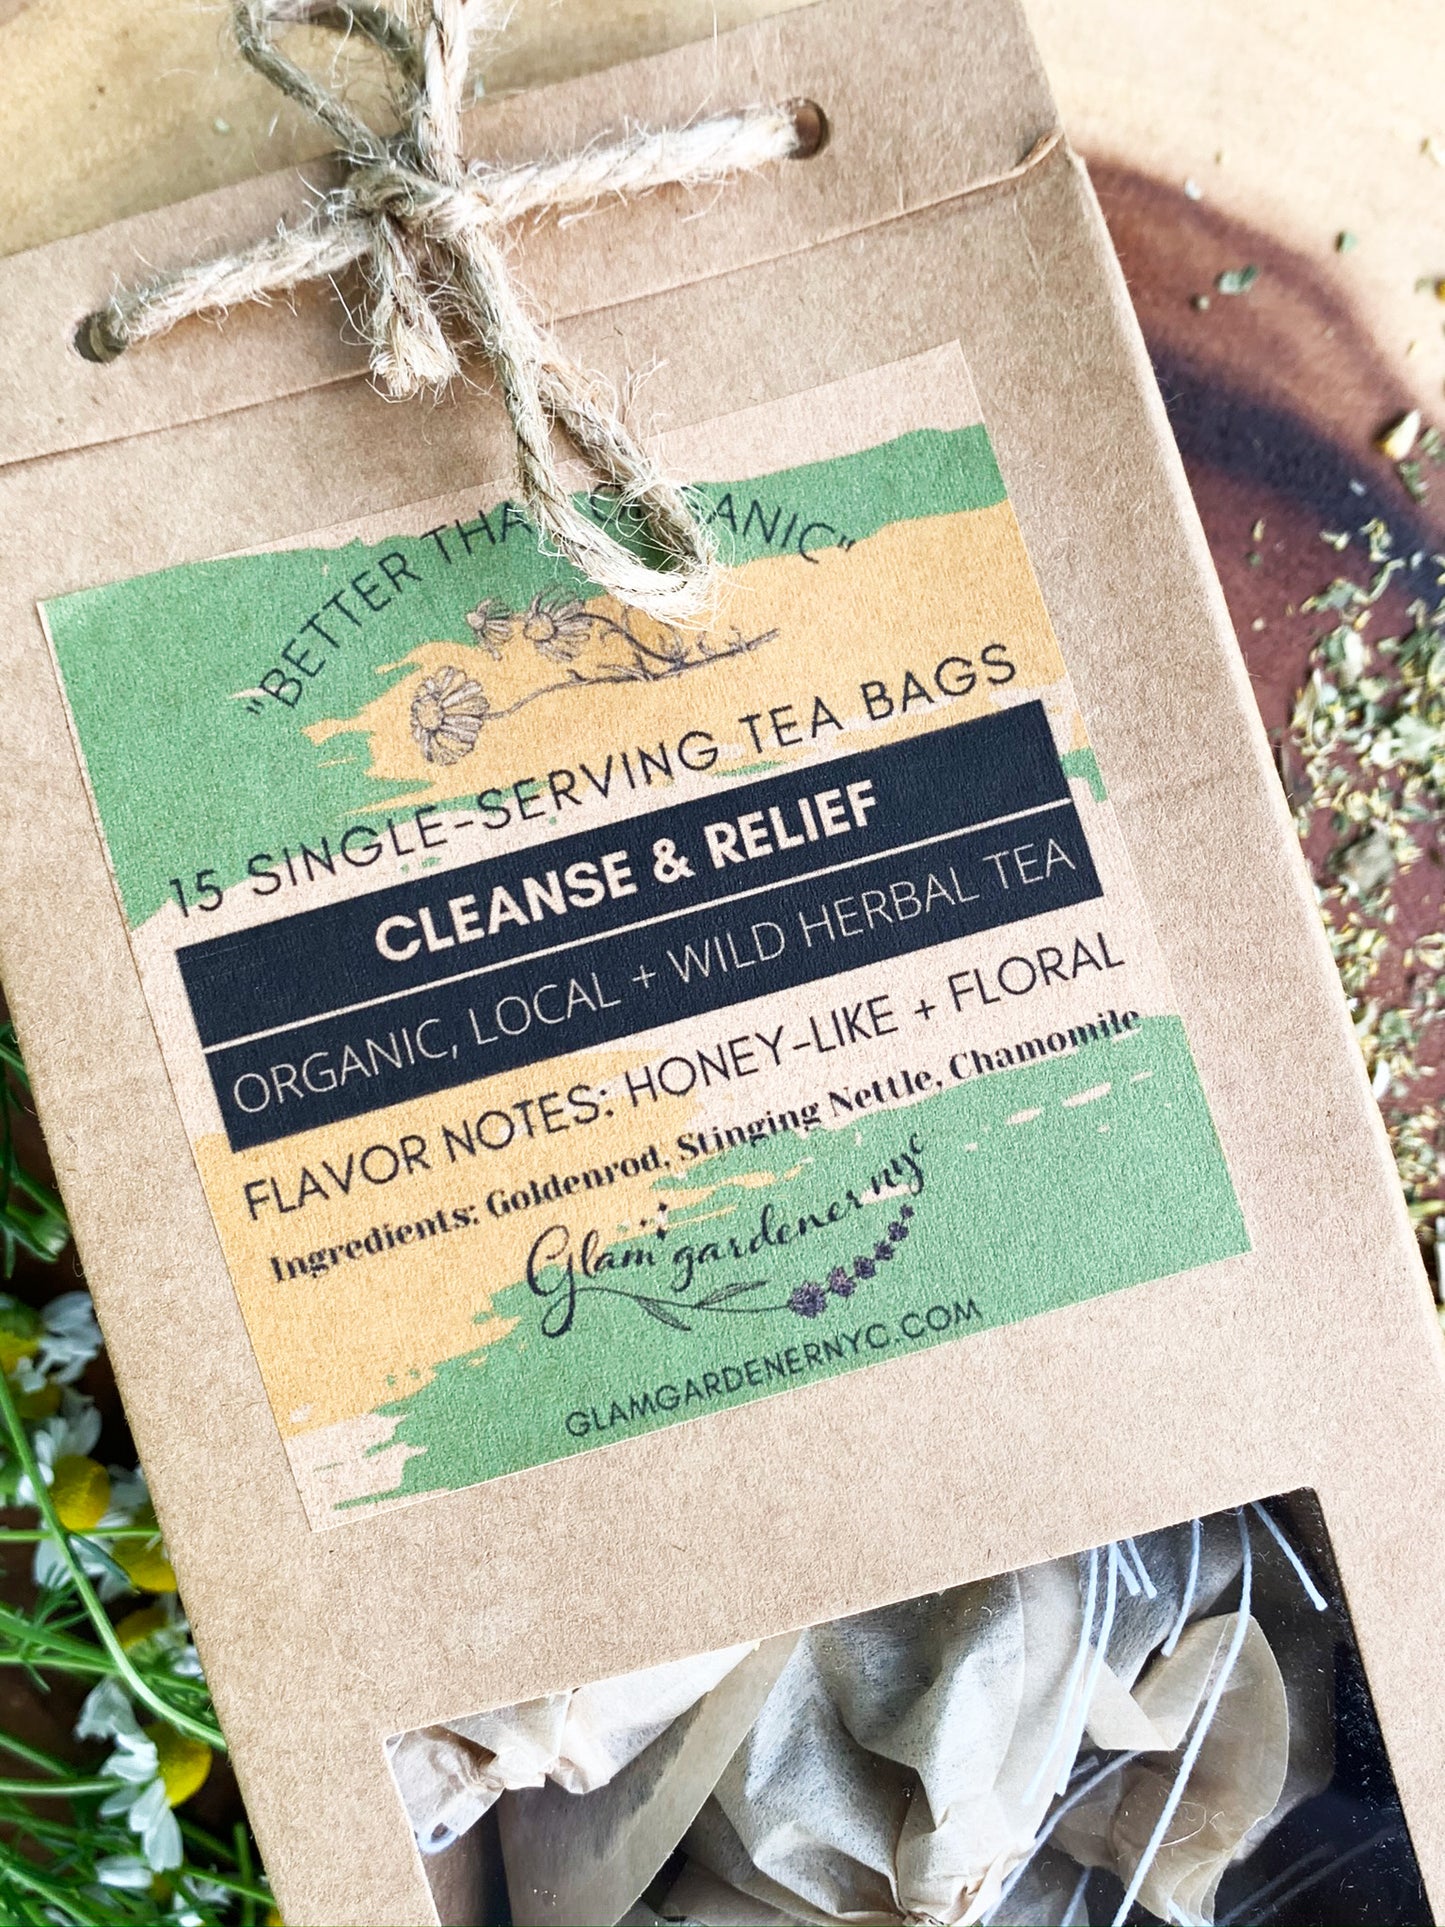 Cleanse + relief tea bagged herbal tea (nervine support & anti-inflammatory)